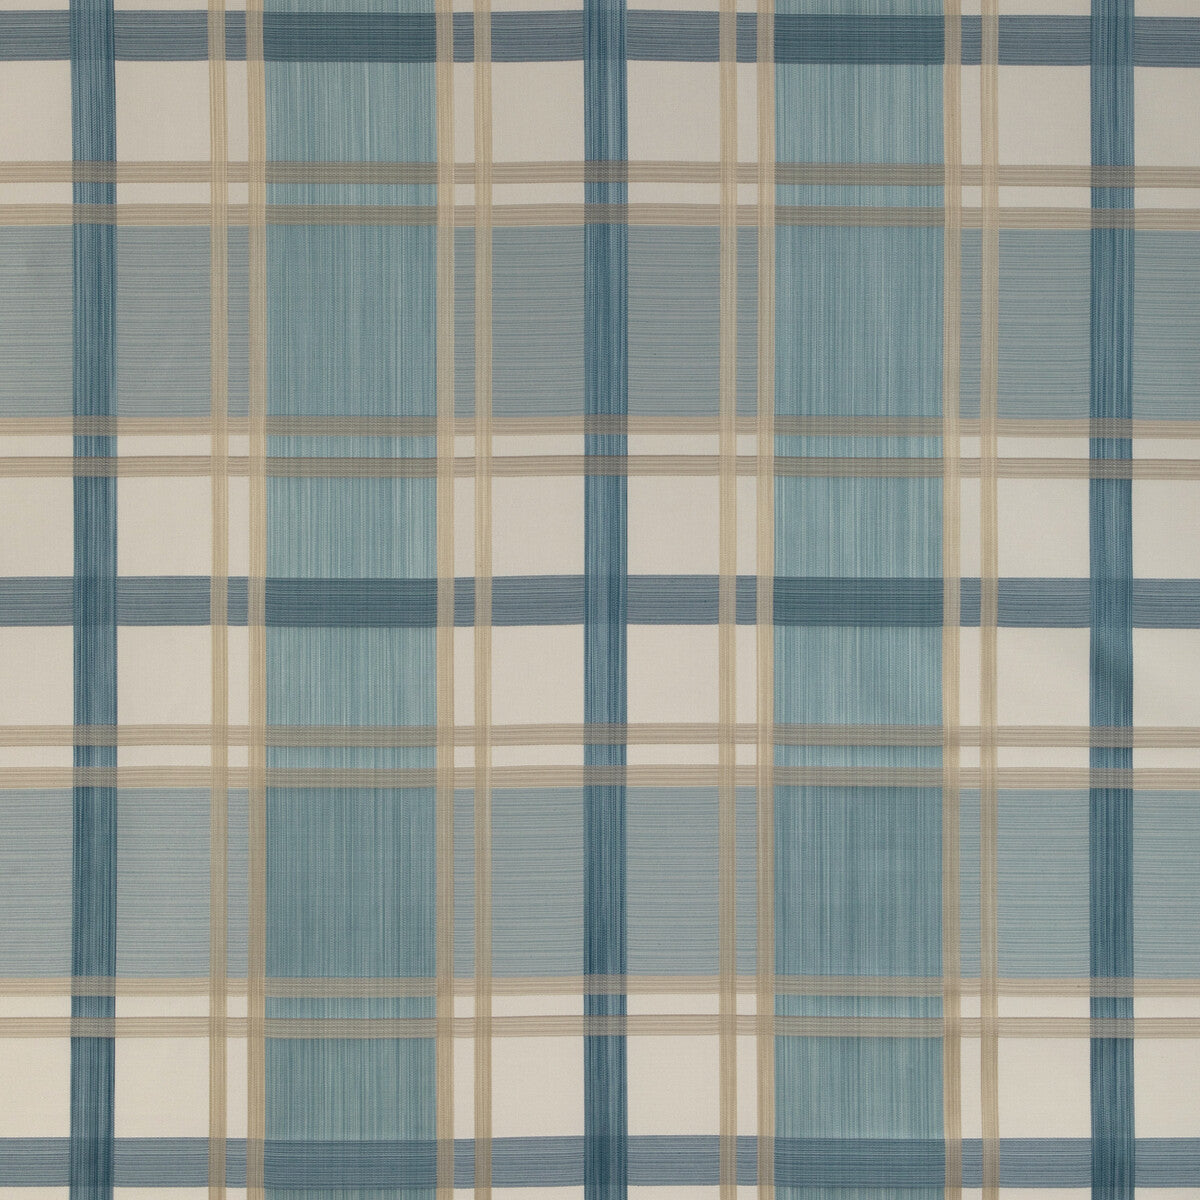 Davies Plaid fabric in sky/sand color - pattern 2023109.516.0 - by Lee Jofa in the Highfield Stripes And Plaids collection